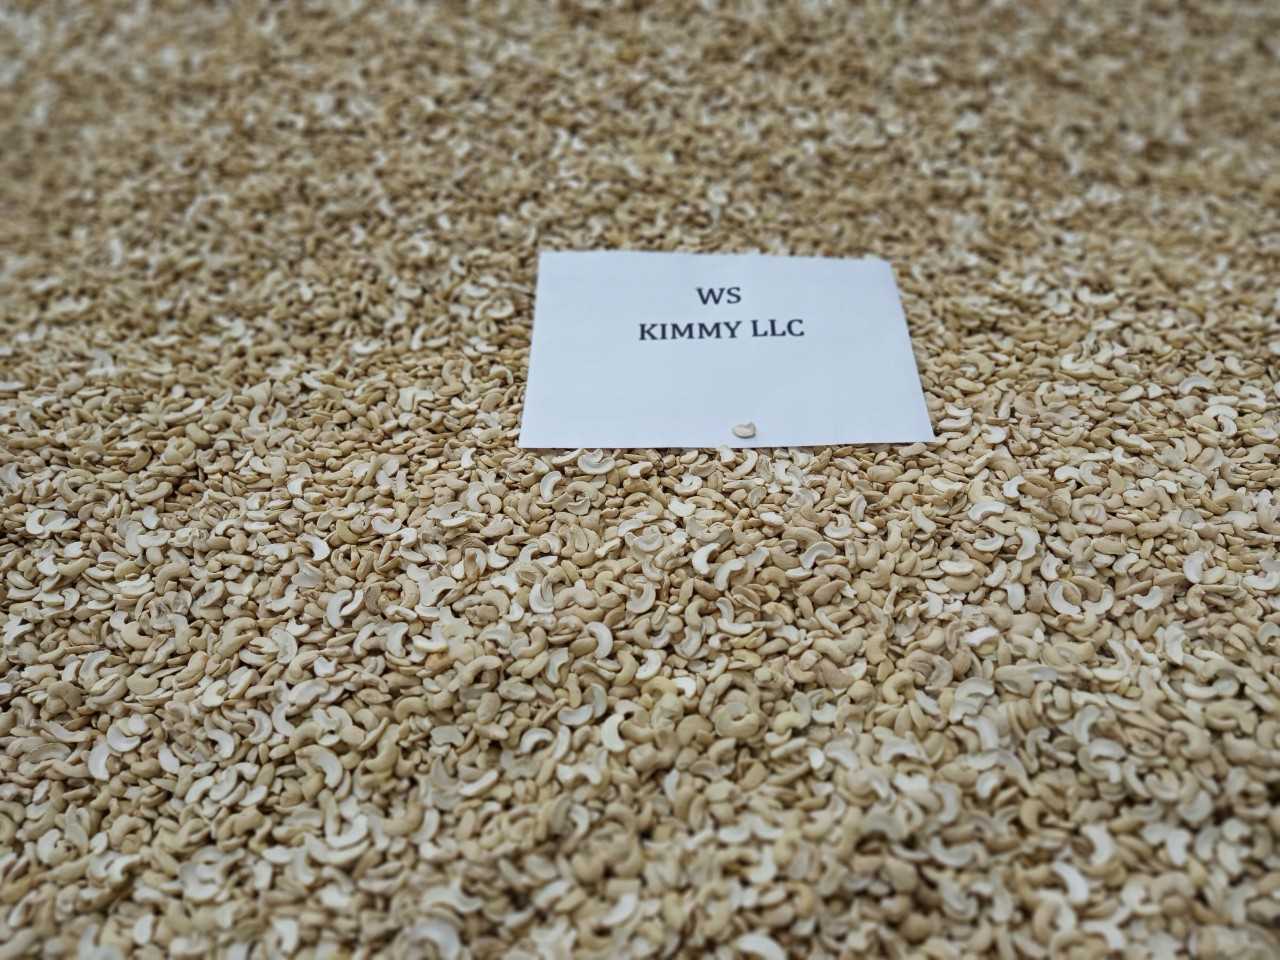 Raw Image Of WS Cashew Nuts From Our Cashew Factory In Binh Phuoc, Vietnam – 4 WS image!